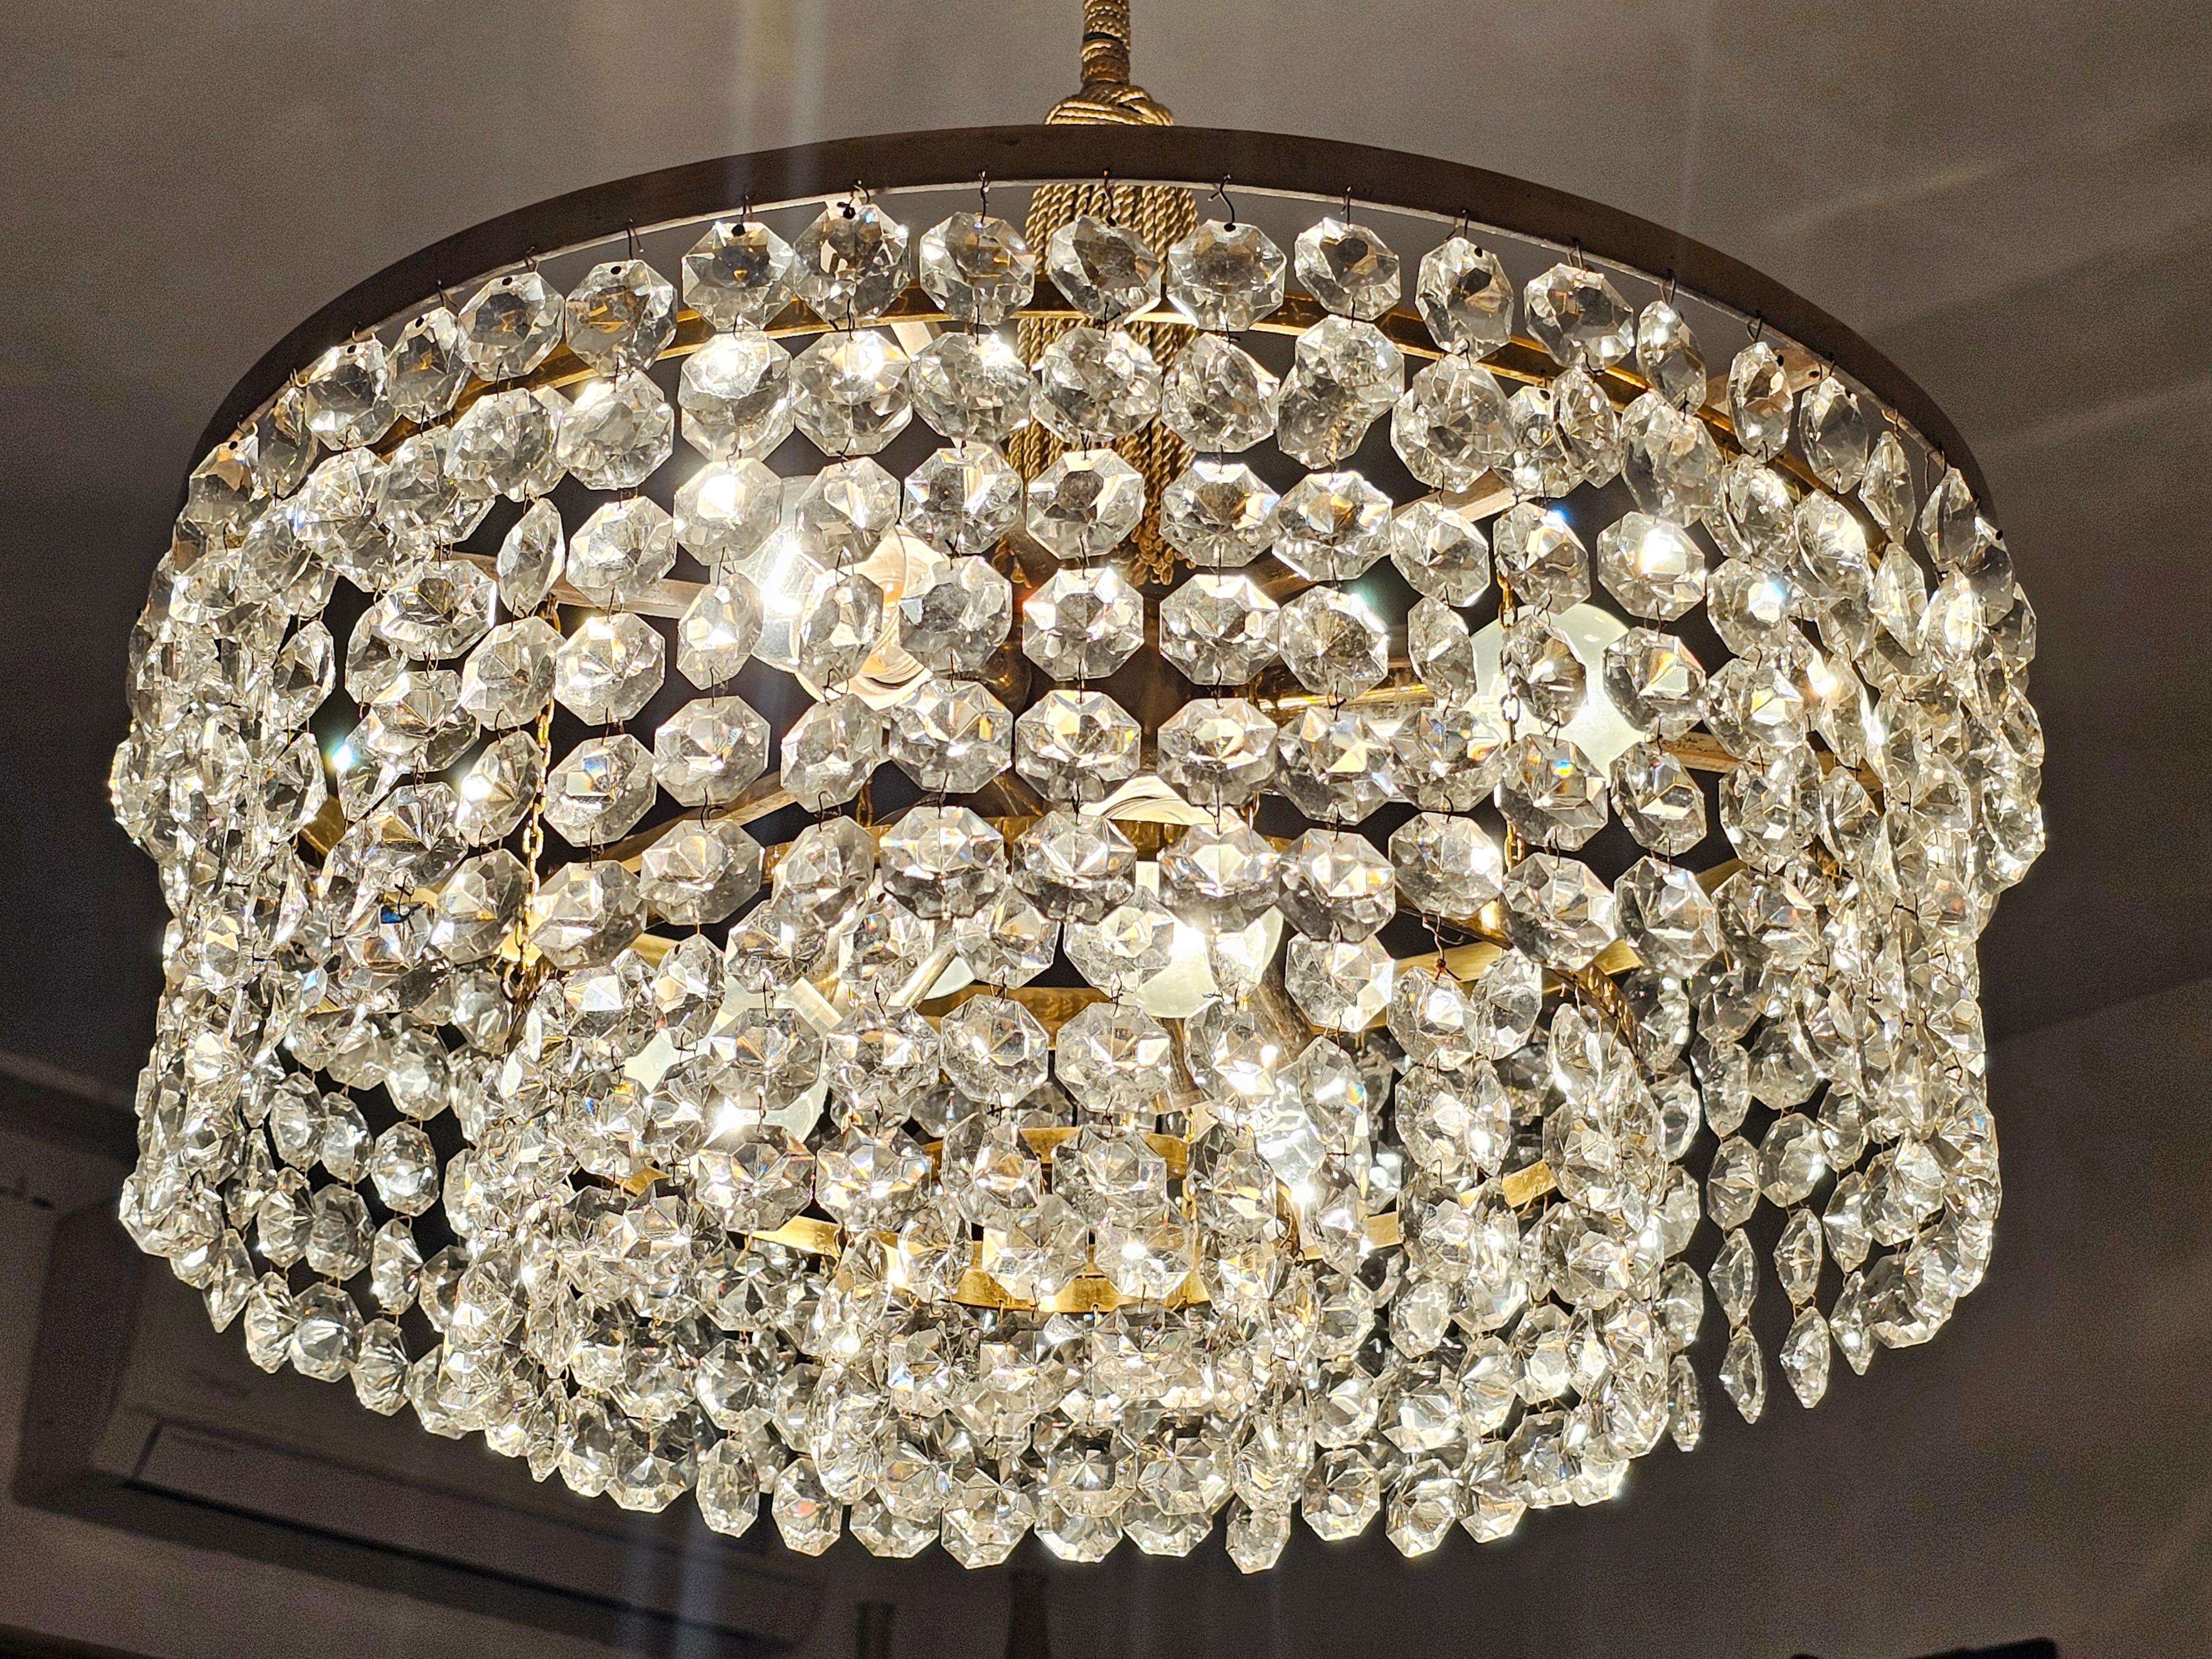 In this listing you will find a gorgeous and very elegant Mid Century Modern chandelier attributed to a renowned maker of luxury lighting based in Vienna - Bakalowits. It features a gold plated brass fixture with 3 tiers of hand polished crystals,